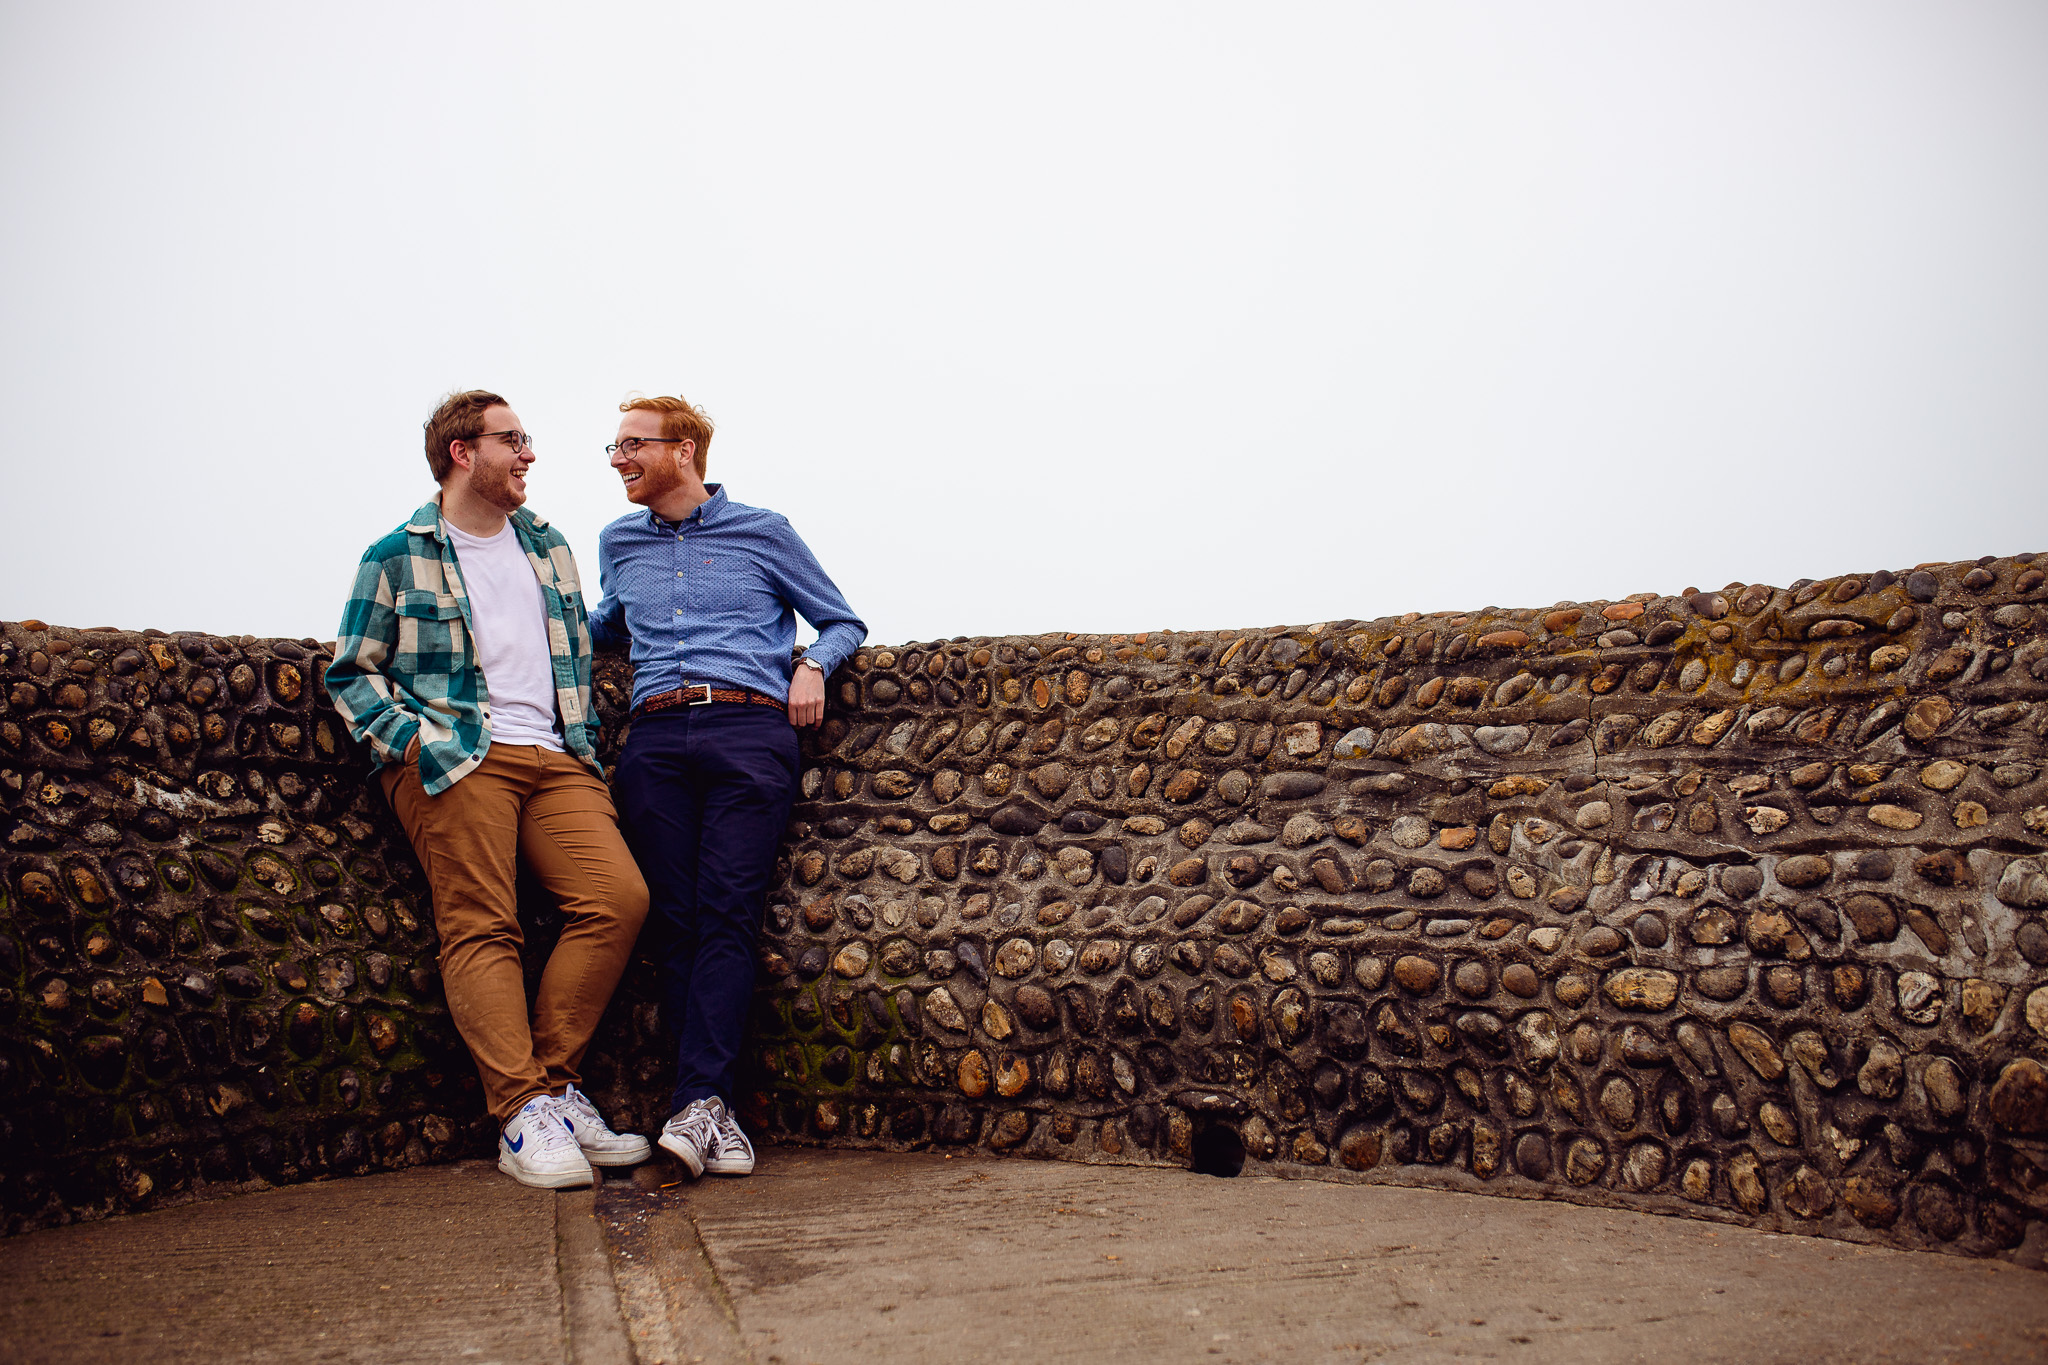 engagement session of LGBTQ+ couple laughing and looking at each other